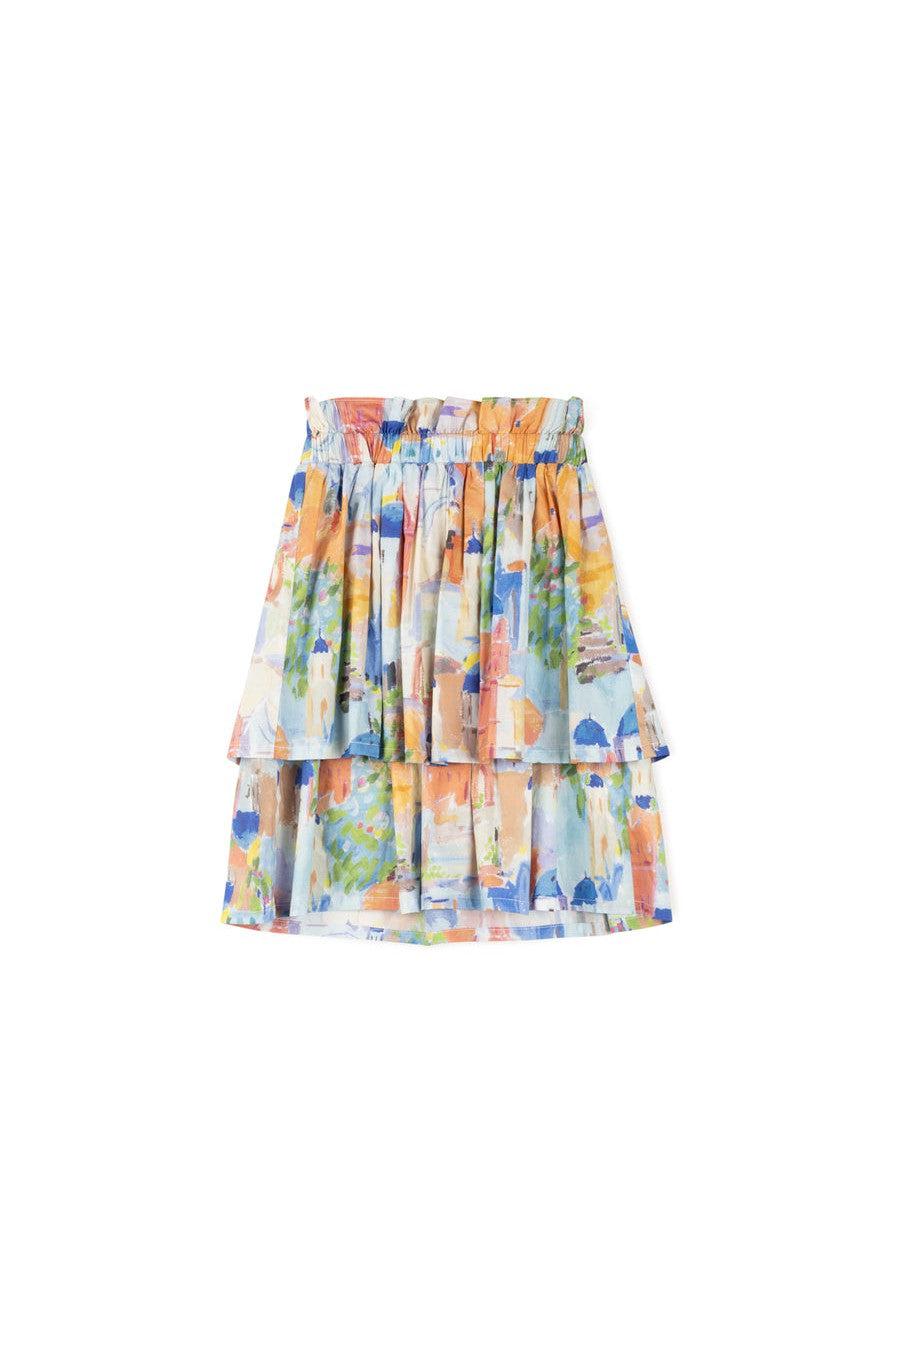 PAINTED PRINTED DOUBLE LAYERED SKIRT חצאית